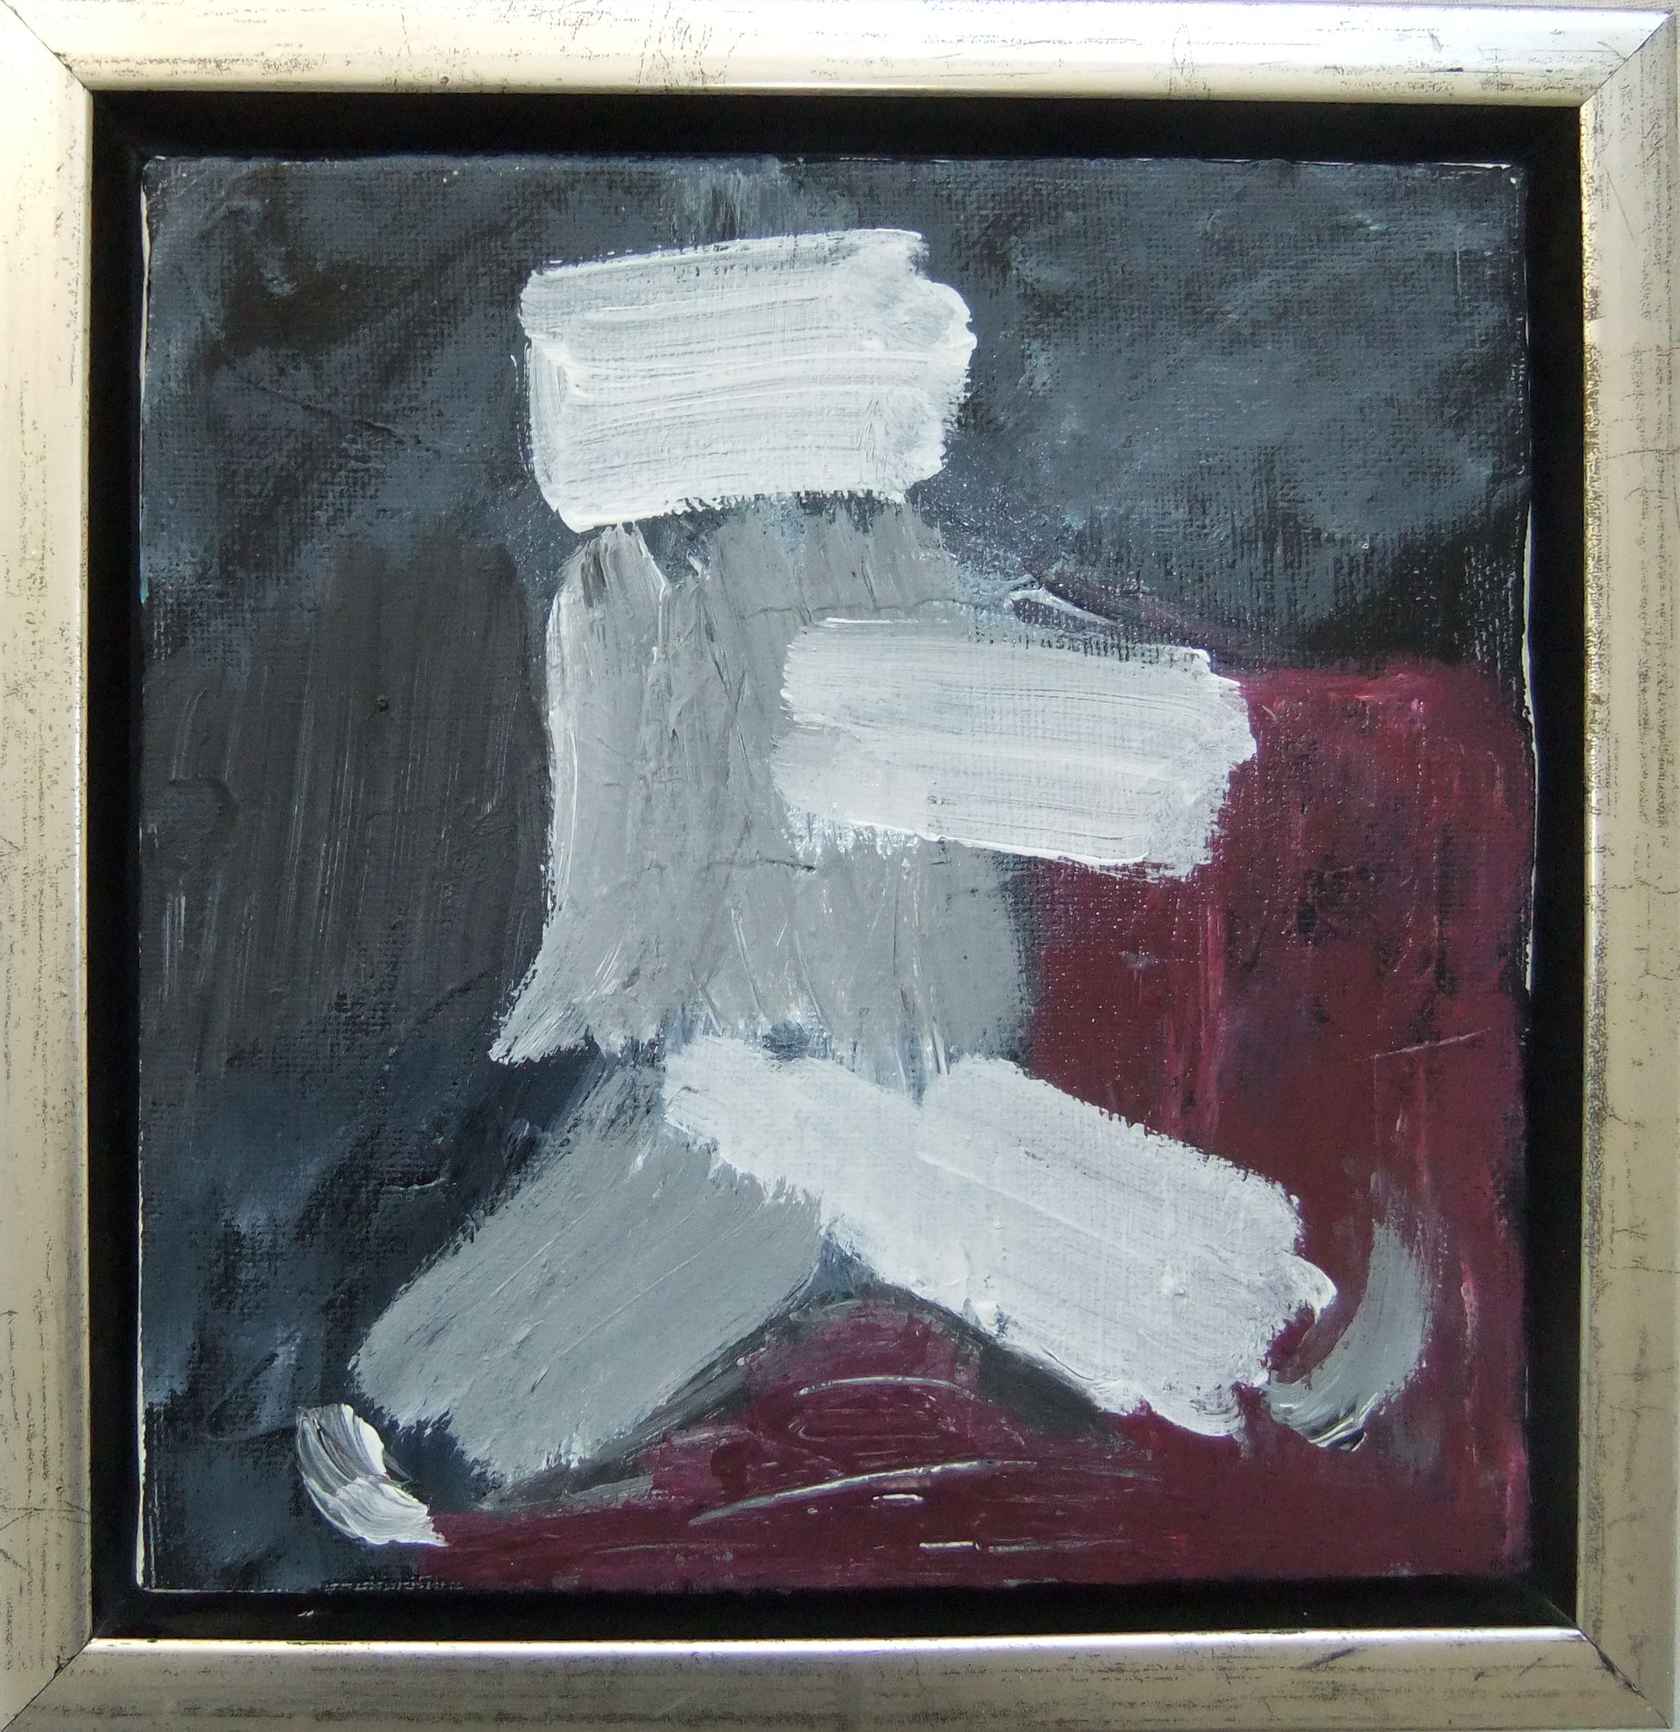 m503, On right way, 20x20 cm, silver frame, dkr 610